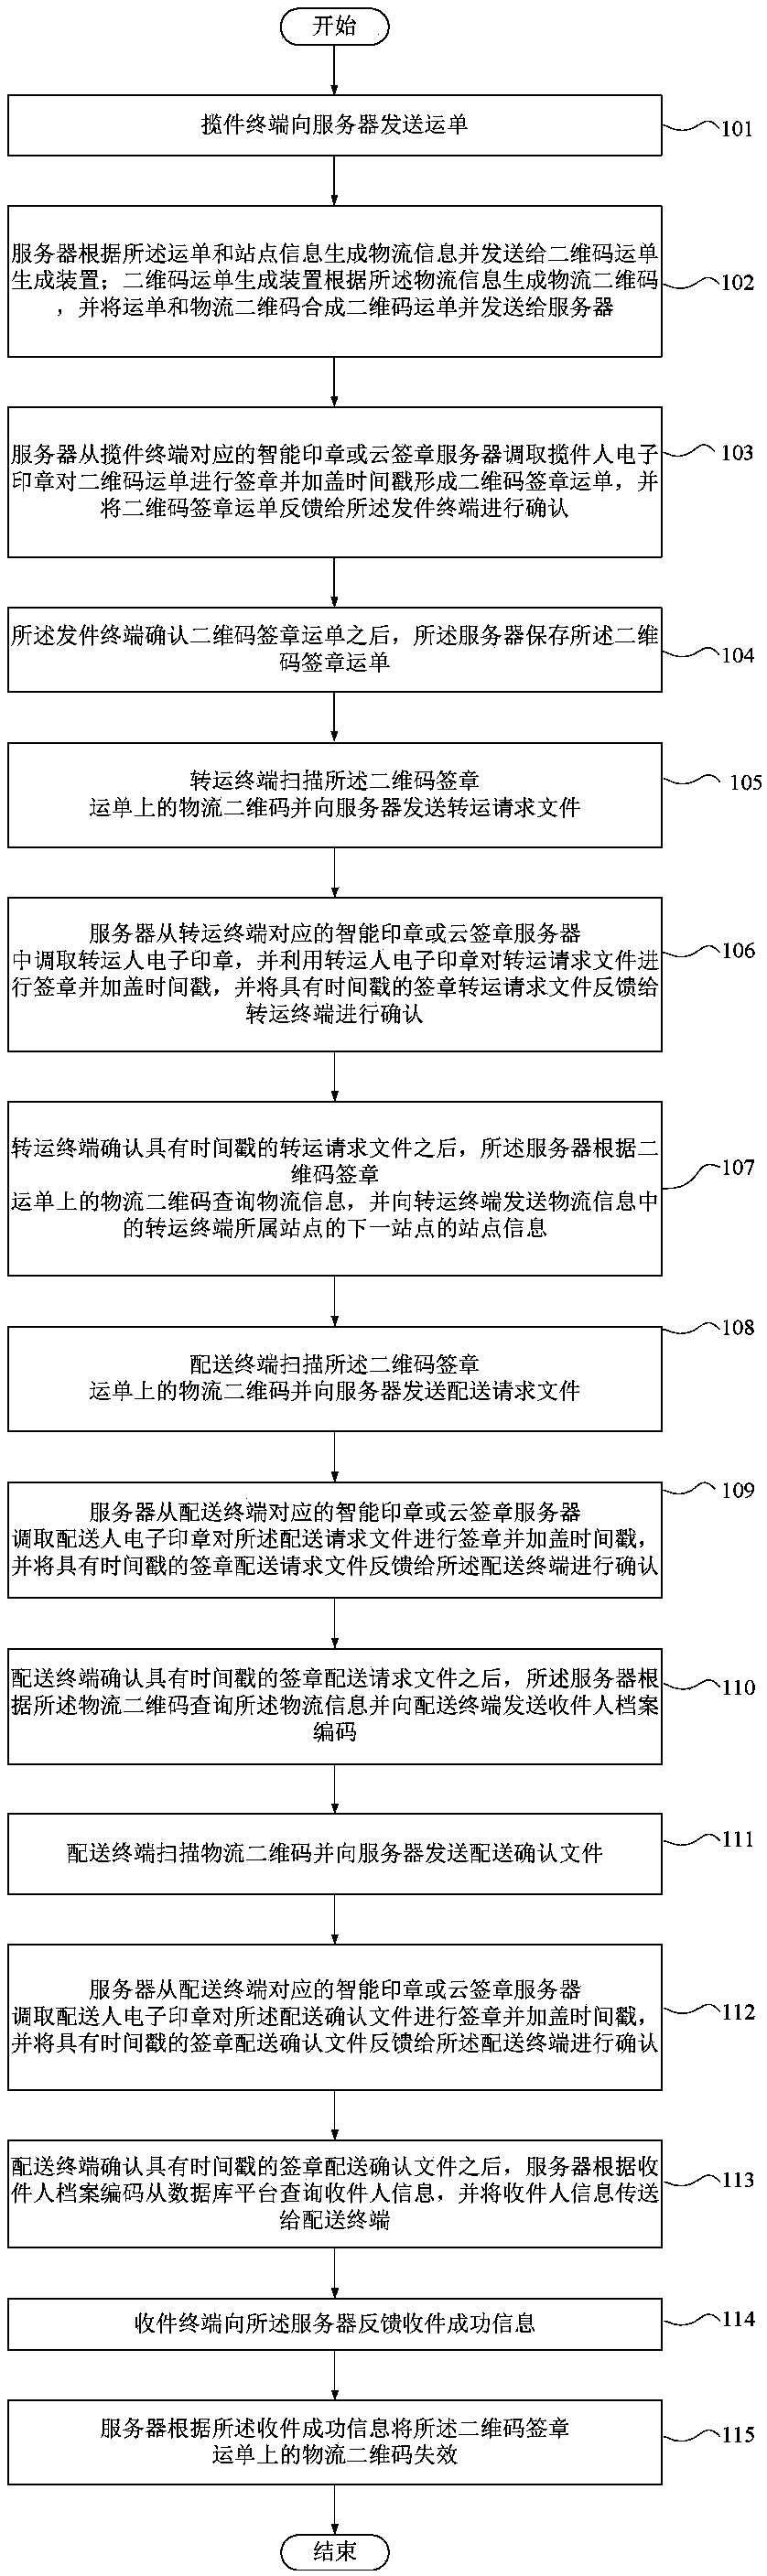 Security management and control method and system for logistics information, and computer storage medium